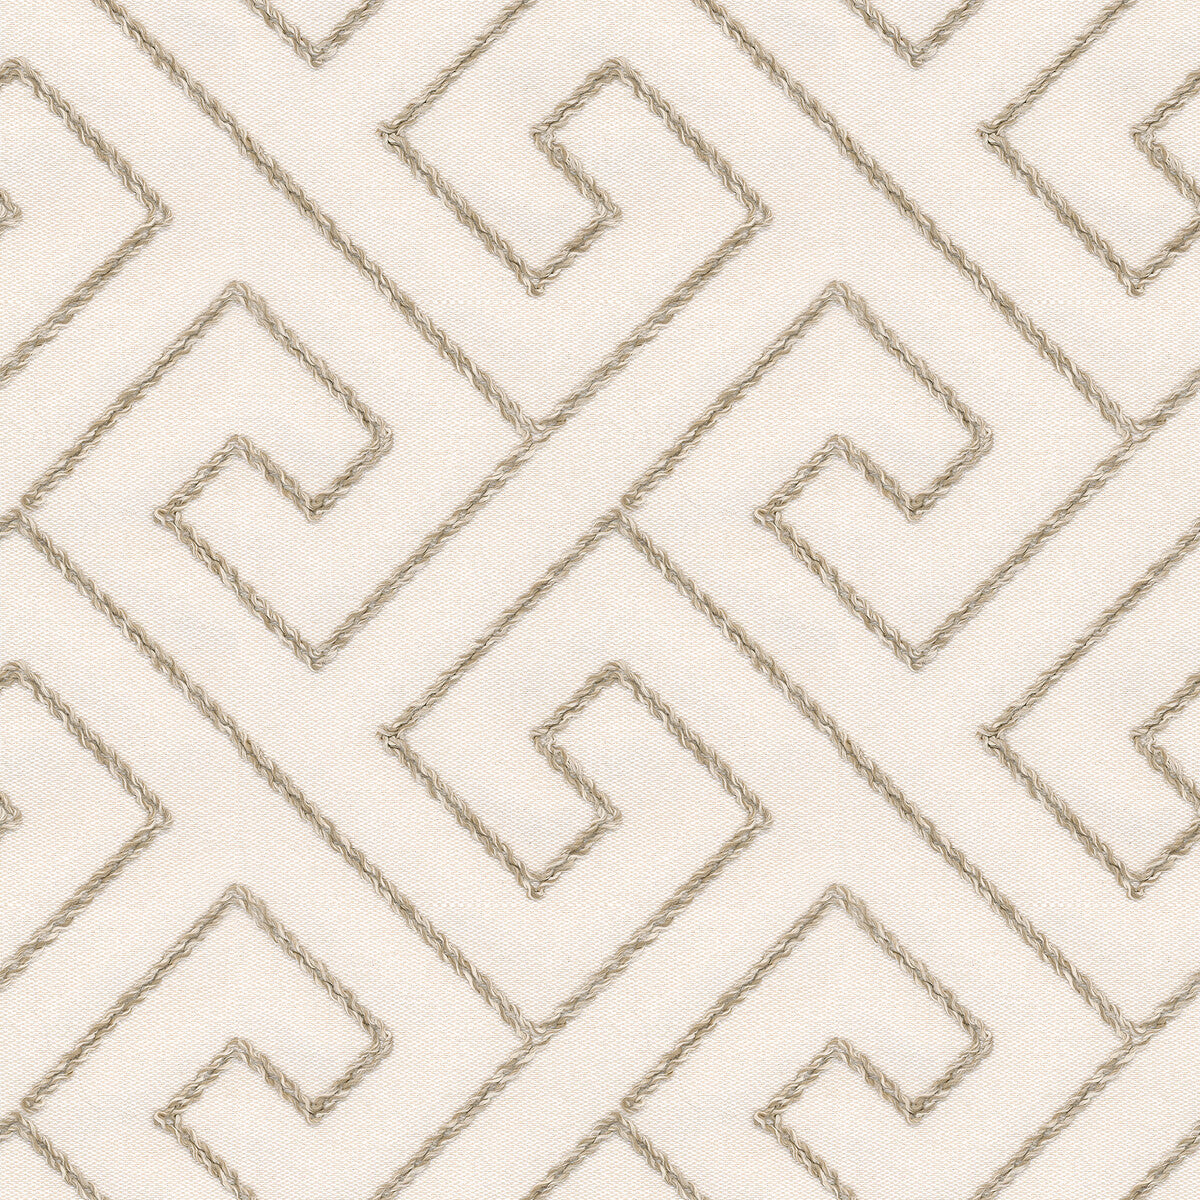 Pilgrimme fabric in beach color - pattern 34505.16.0 - by Kravet Design in the Echo Indoor Outdoor Ibiza collection